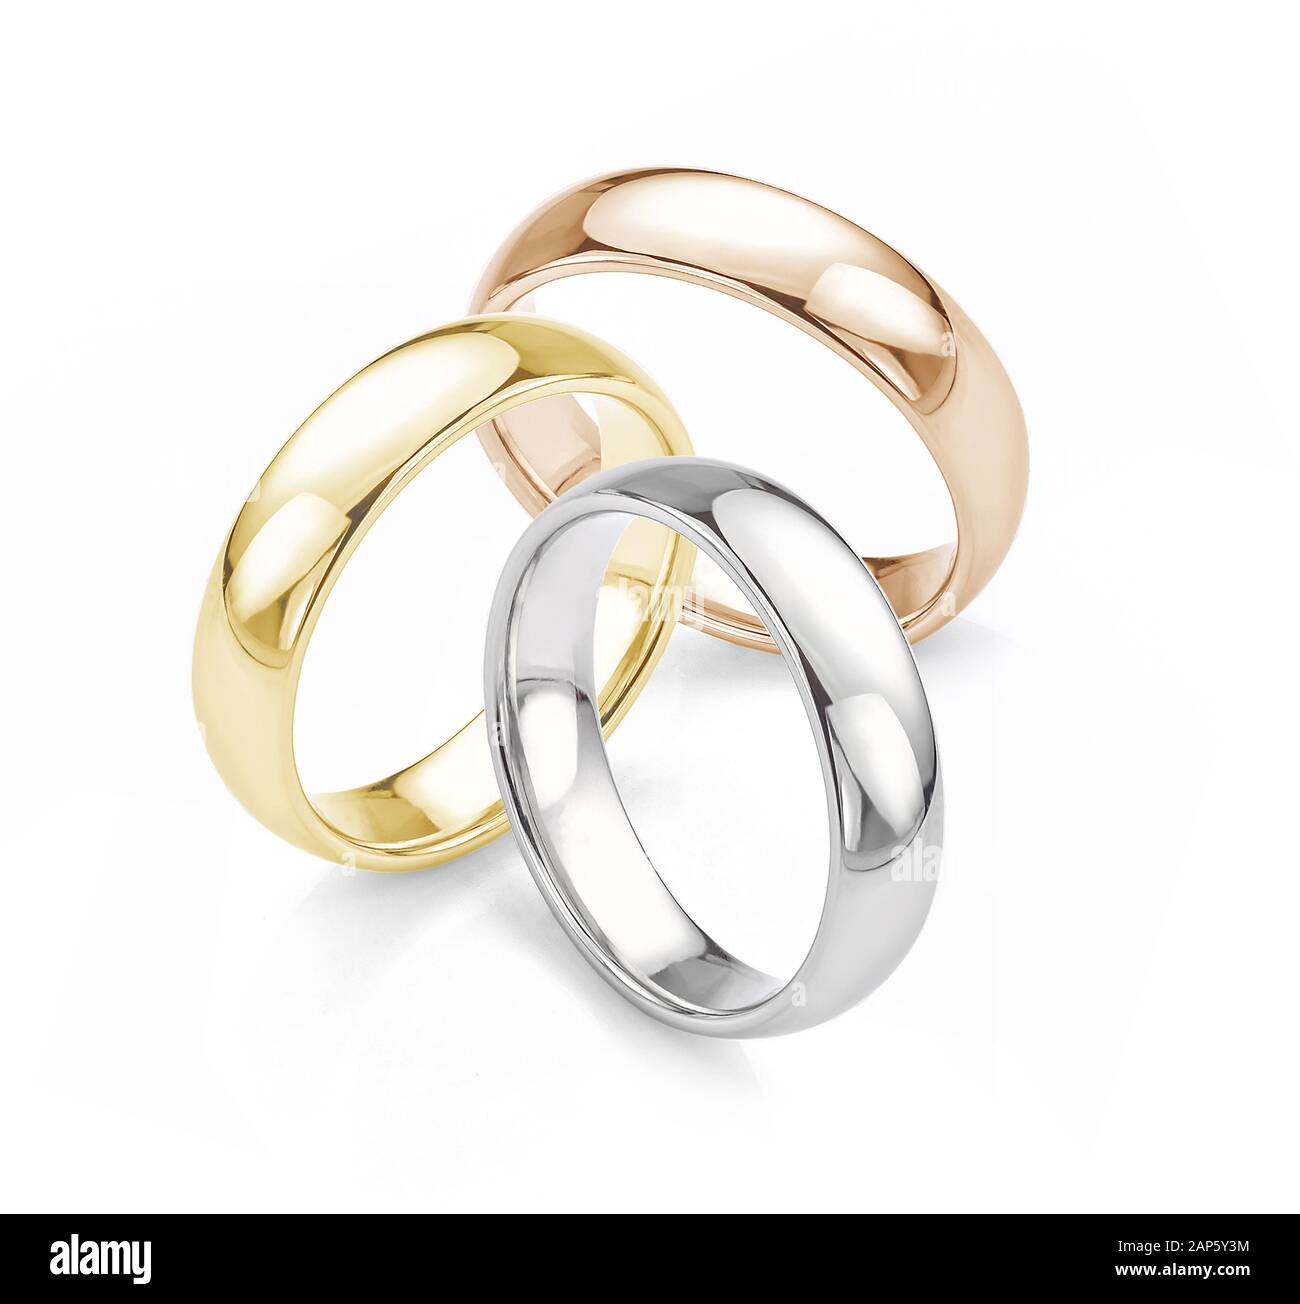 Wedding Rings. White Gold, Yellow Gold and Rose Gold Matching Wedding Rings Group Photograph Isolated on White Background. Stock Photo